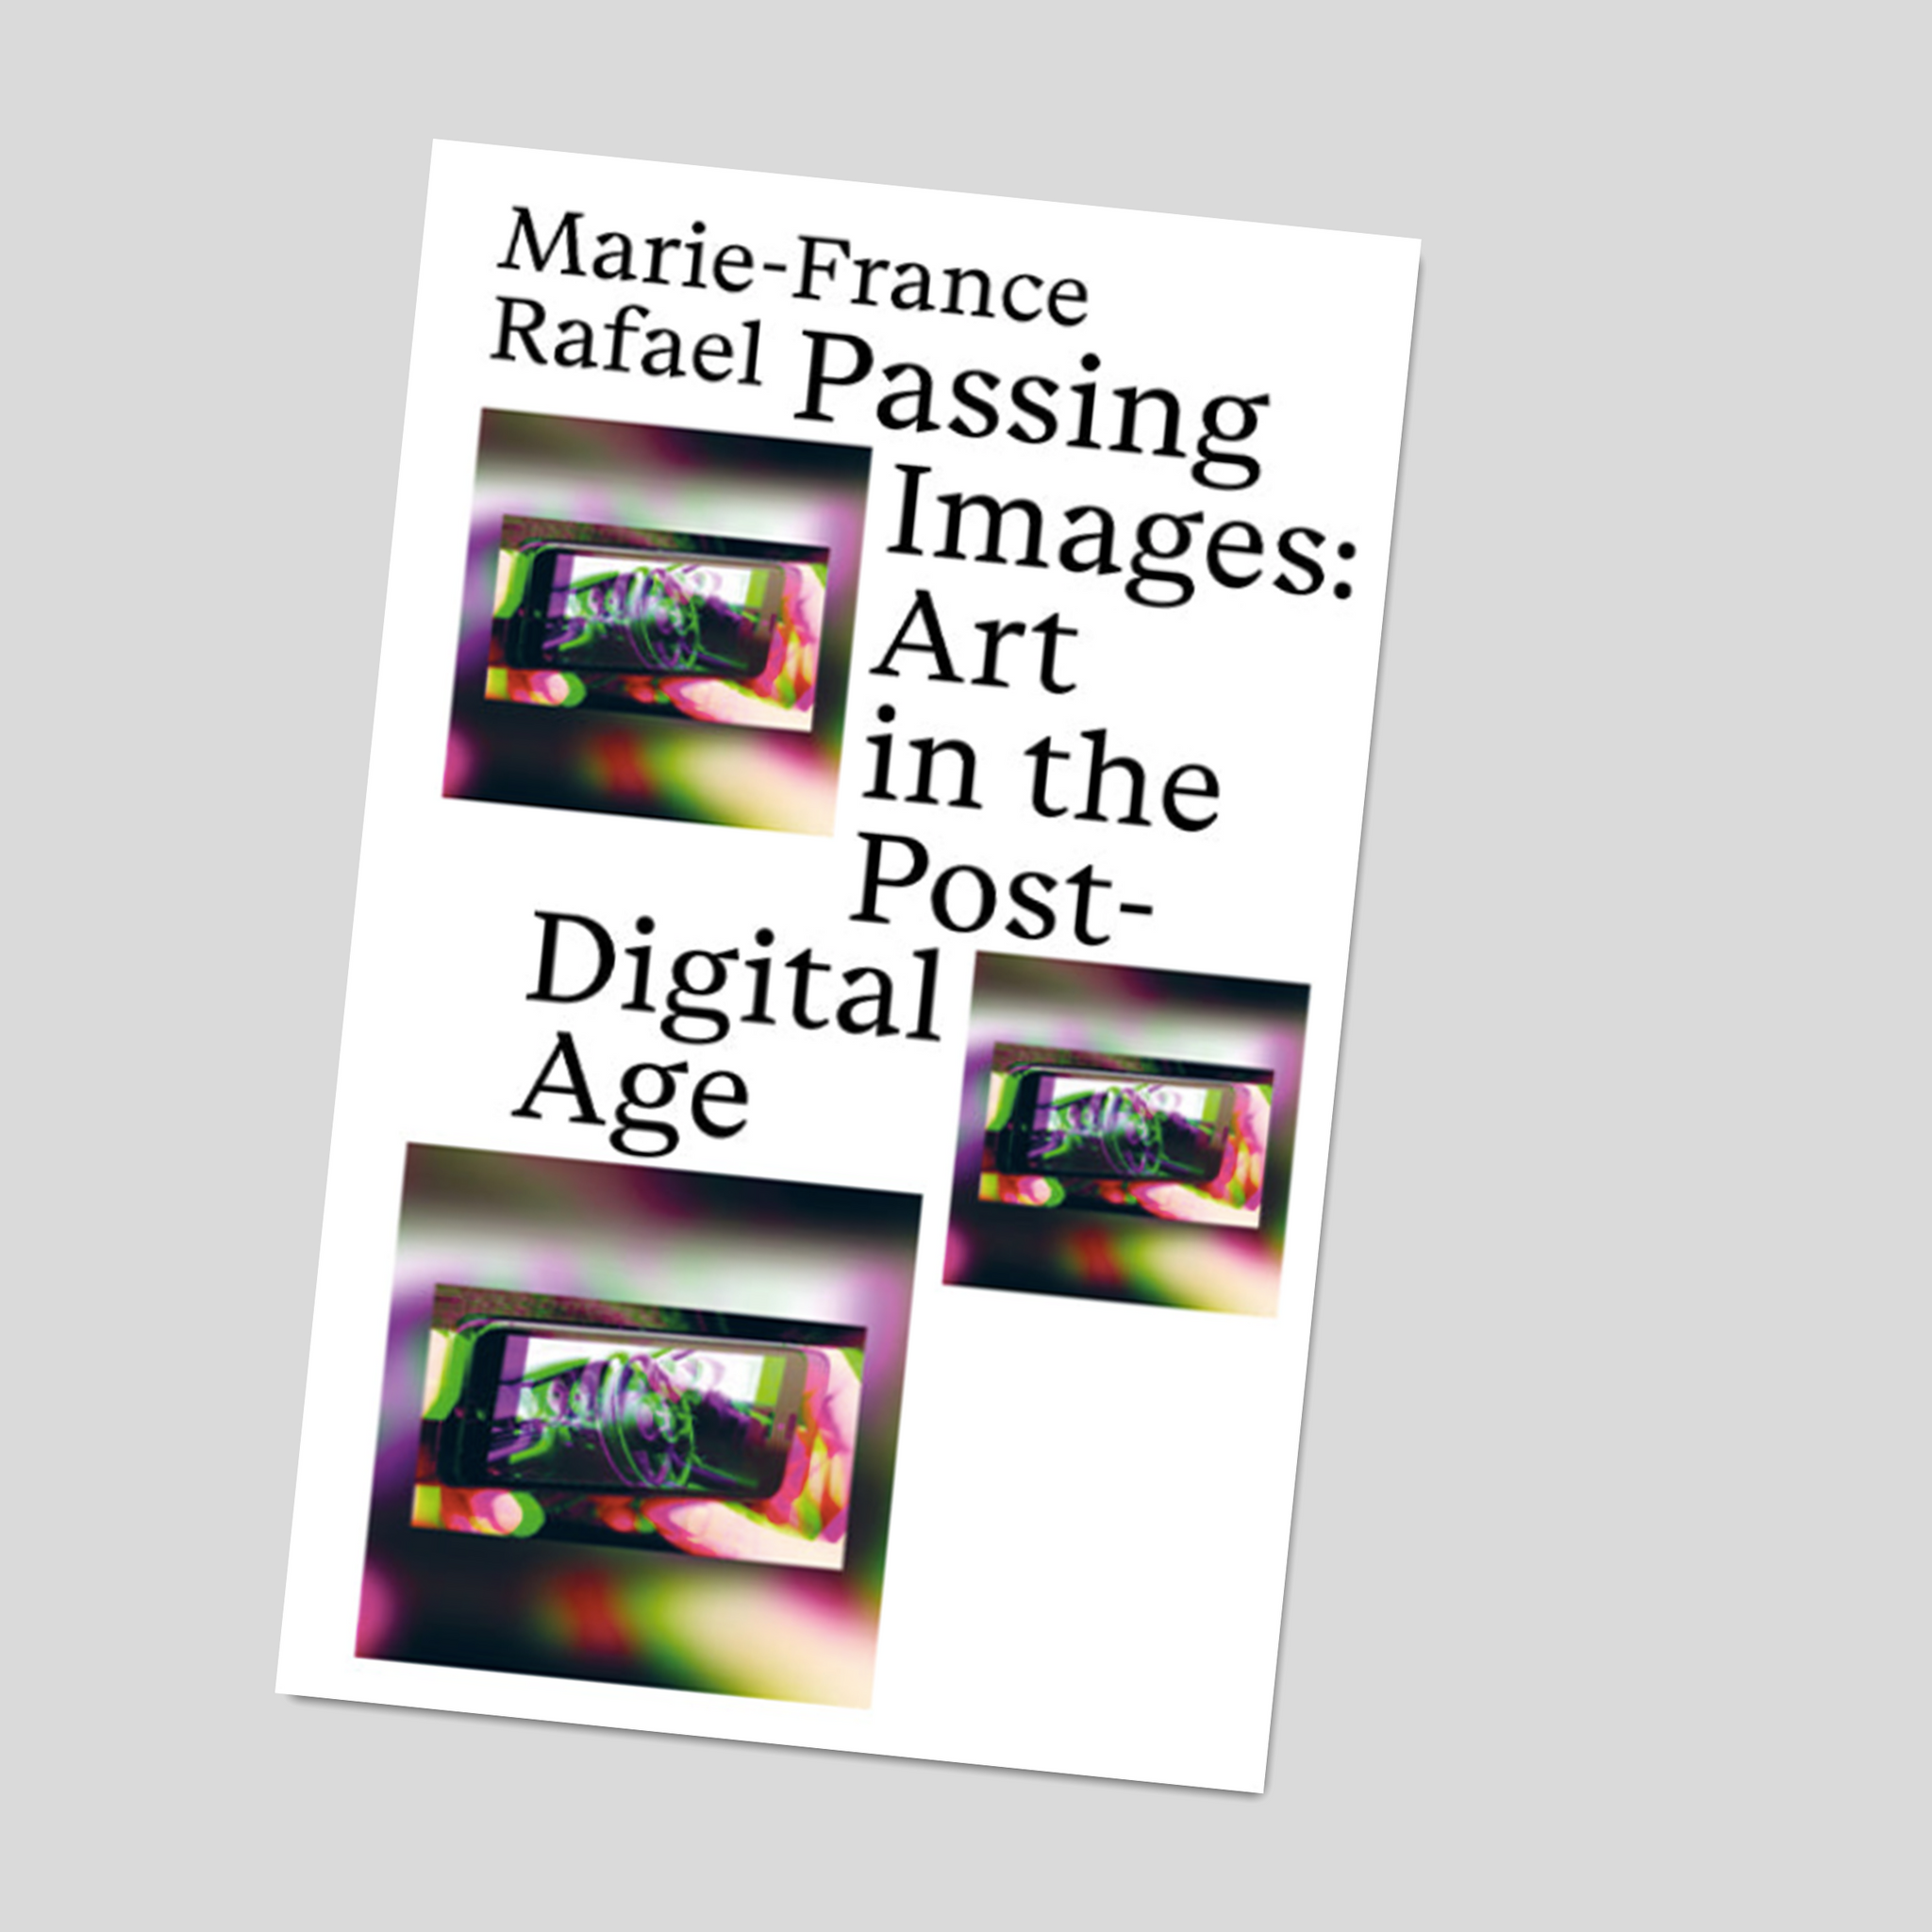 Passing Images – Art in the Post-Digital Age - Marie-France Rafael